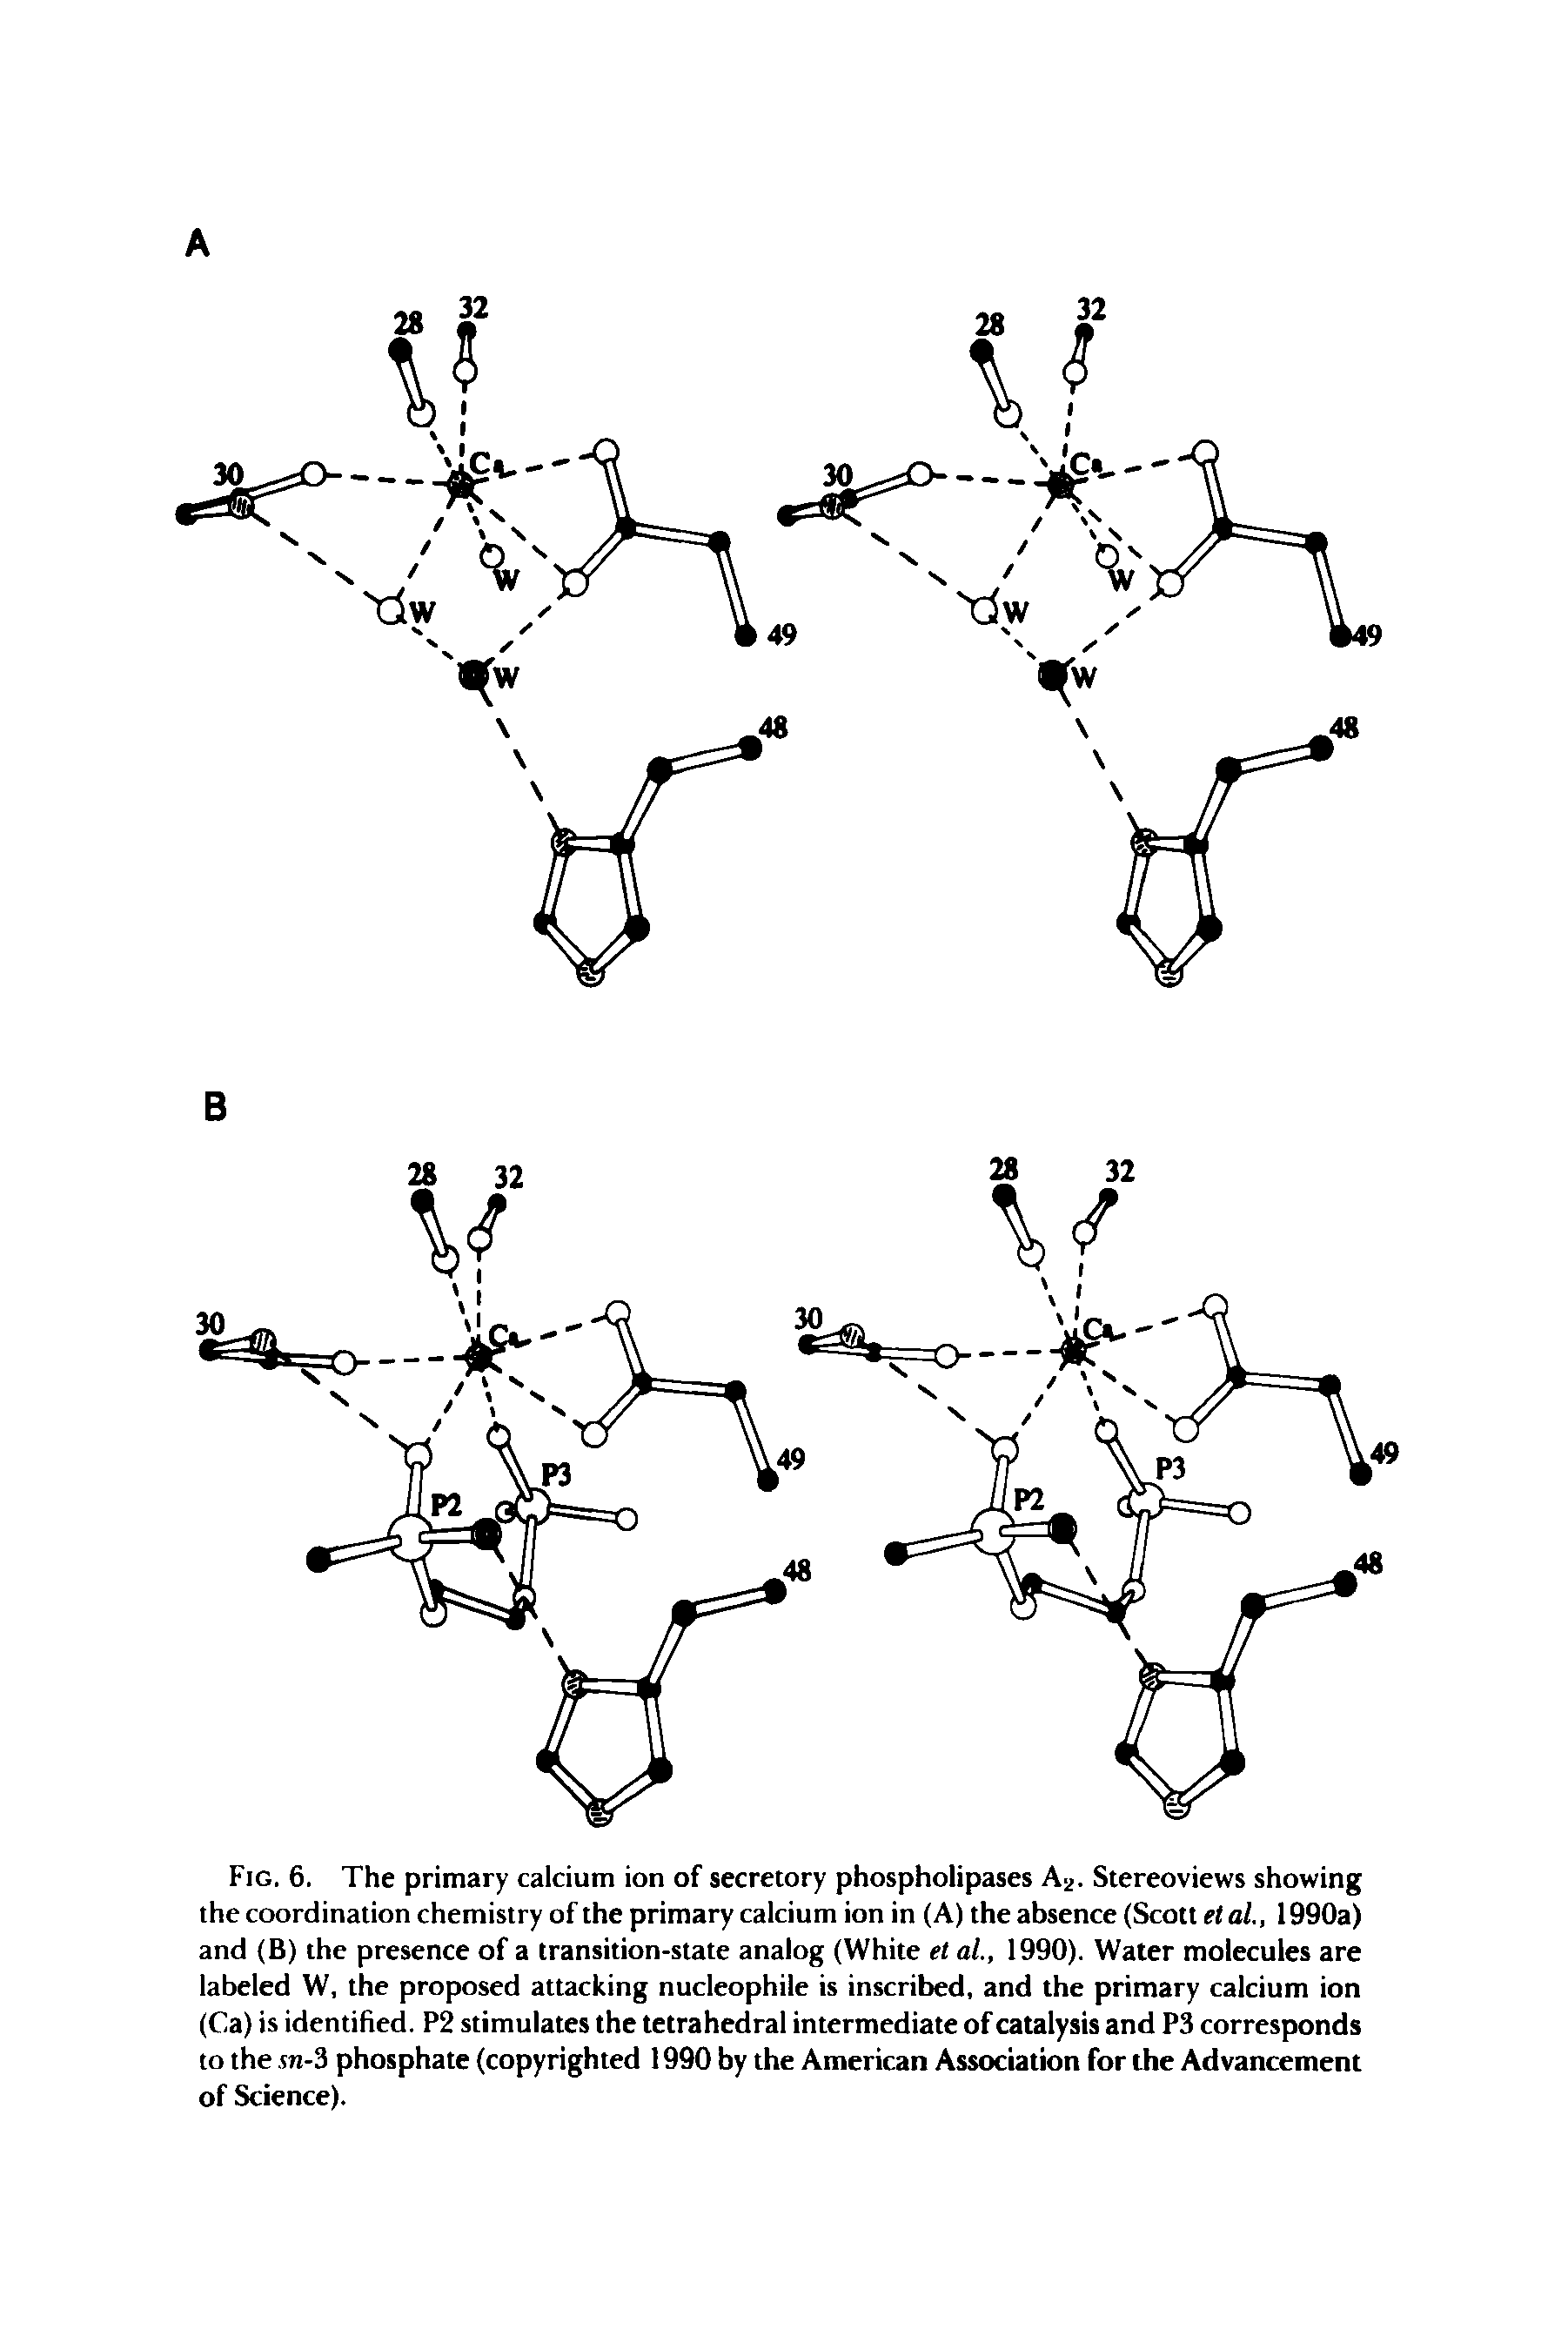 Fig. 6. The primary calcium ion of secretory phospholipases A .. Stereoviews showing the coordination chemistry of the primary calcium ion in (A) the absence (Scott etal, 1990a) and (B) the presence of a transition-state analog (White el ai, 1990). Water molecules are labeled W, the proposed attacking nucleophile is inscribed, and tbe primary calcium ion (Ca) is identified. P2 stimulates the tetrahedral intermediate of catalysis and P3 corresponds to the, sn-3 phosphate (copyrighted 1990 by the American Association for the Advancement of Science).